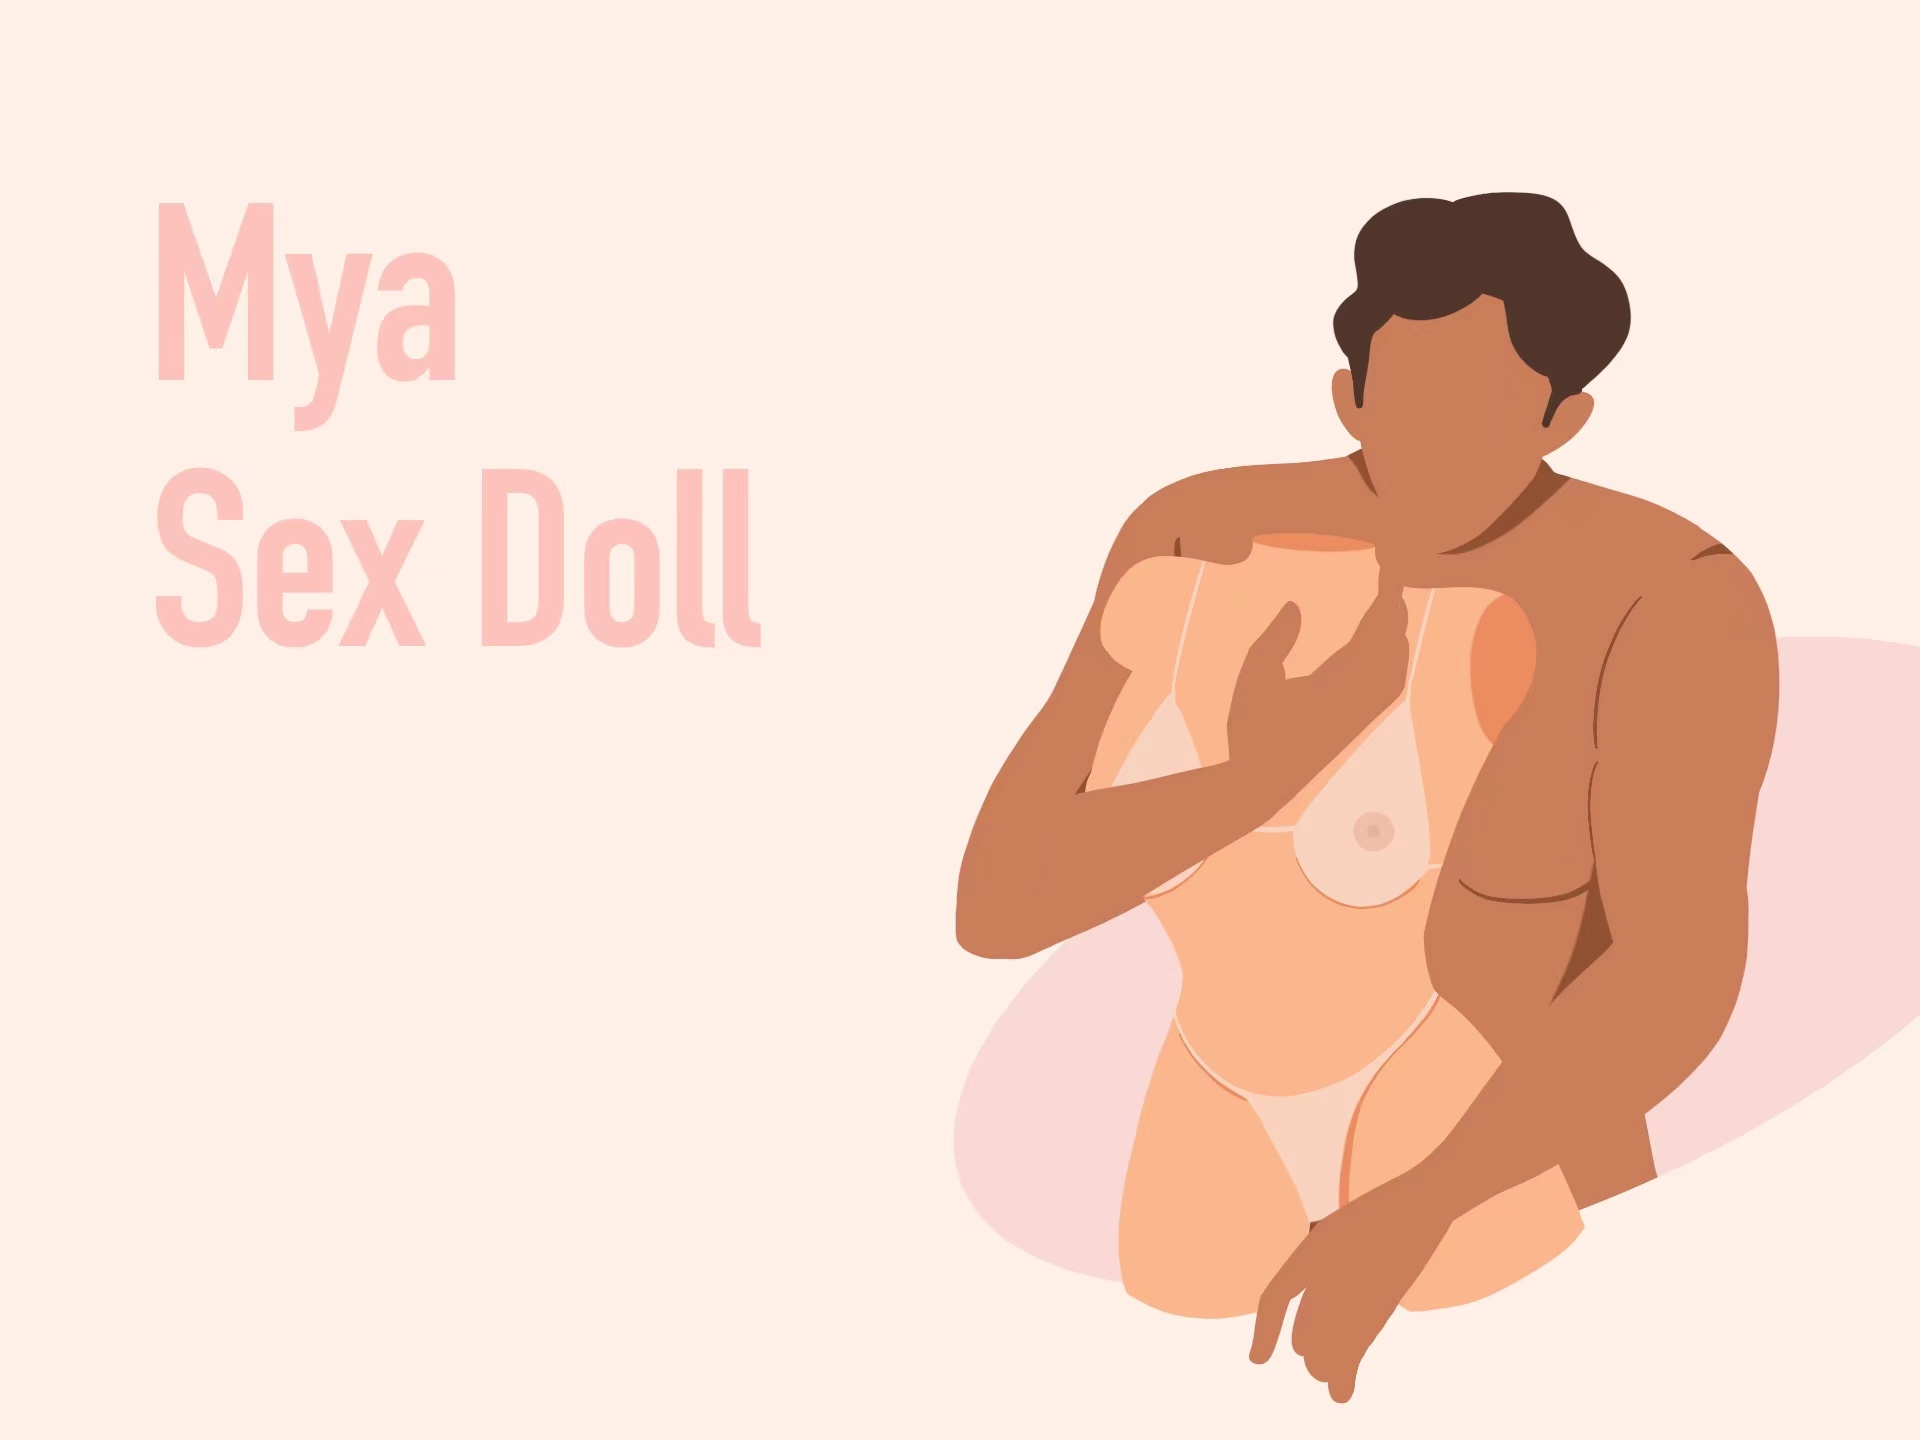 3 Sexy Ways To Be Intimate With Mya - The Most Realistic Sex Doll